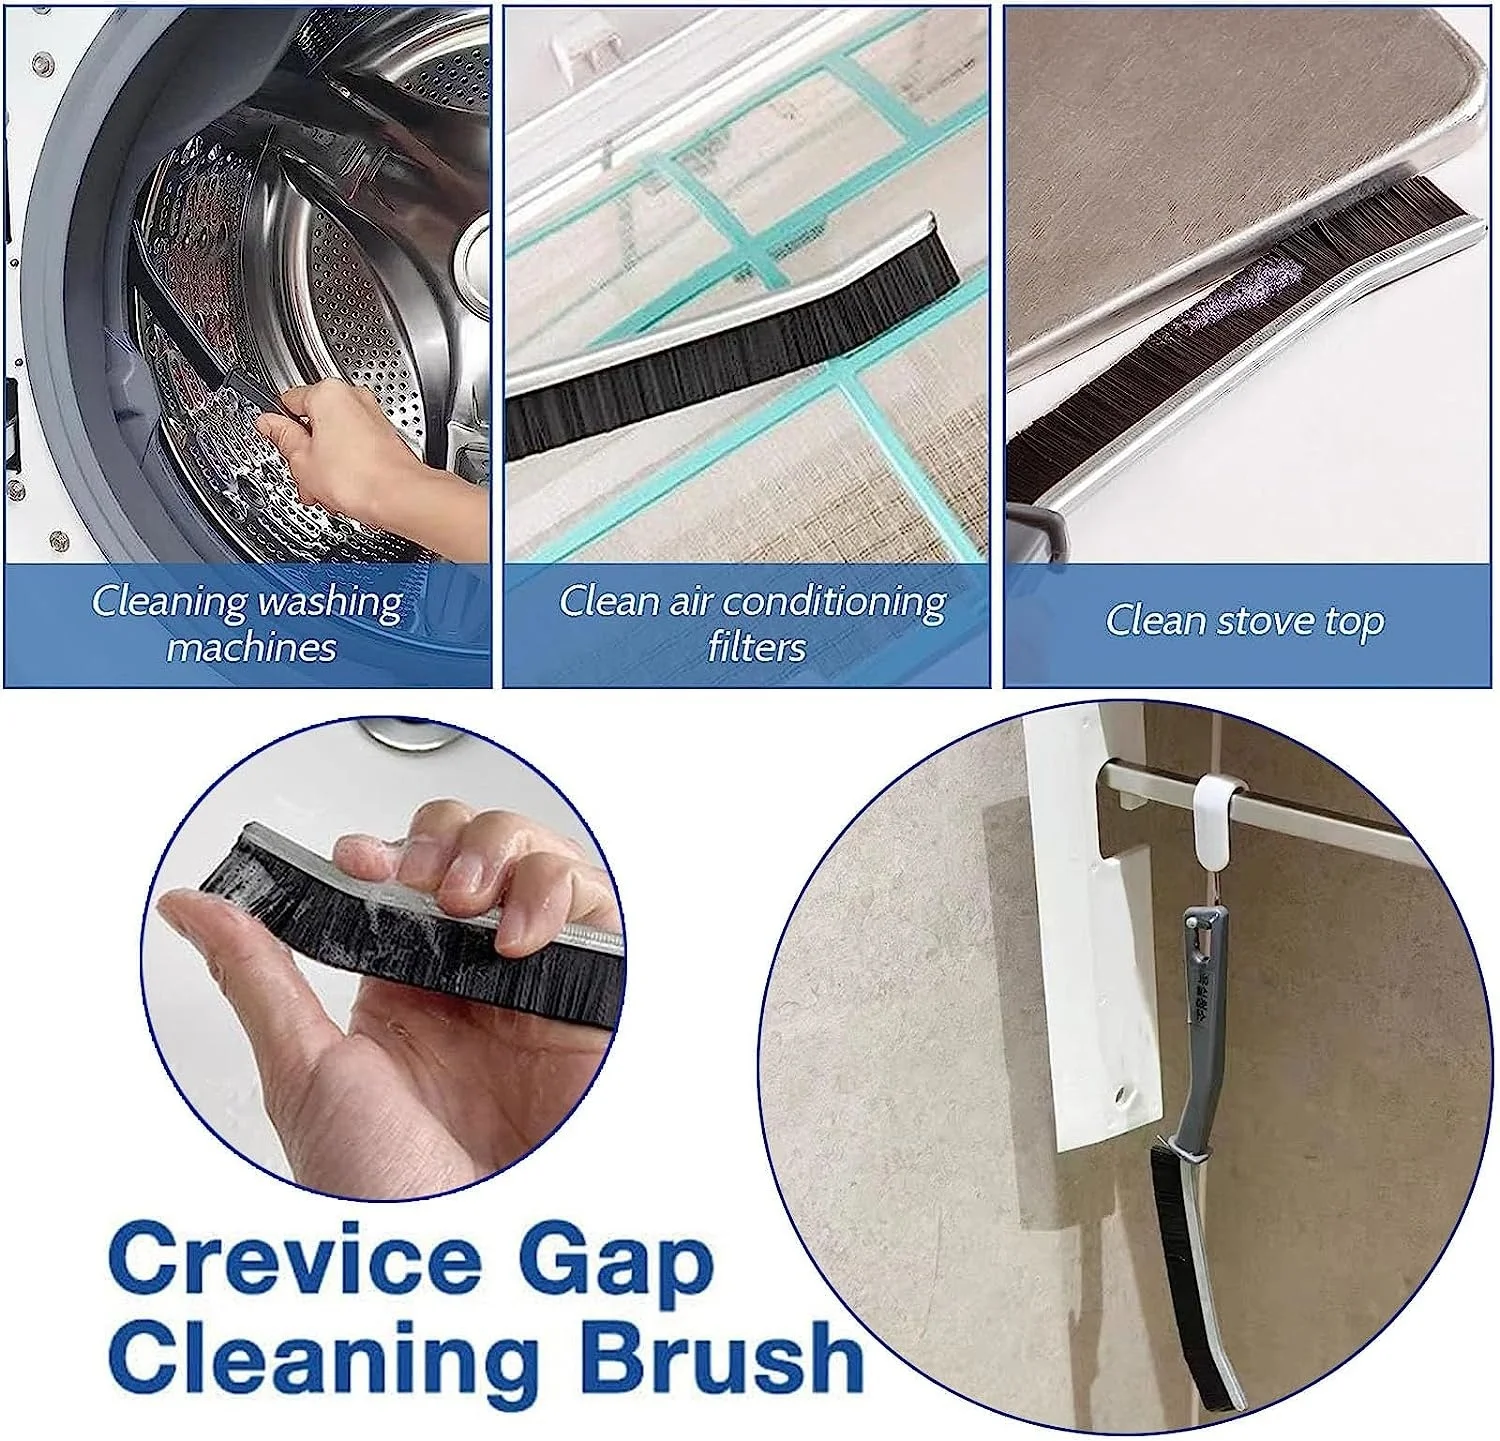 https://ae01.alicdn.com/kf/S74889e3fe5c0402387c2a3eca4eb9285L/Hard-Bristled-Crevice-Cleaning-Brush-Grout-Cleaner-Scrub-Brush-Deep-Tile-Joints-Crevice-Gap-Cleaning-Brush.jpg